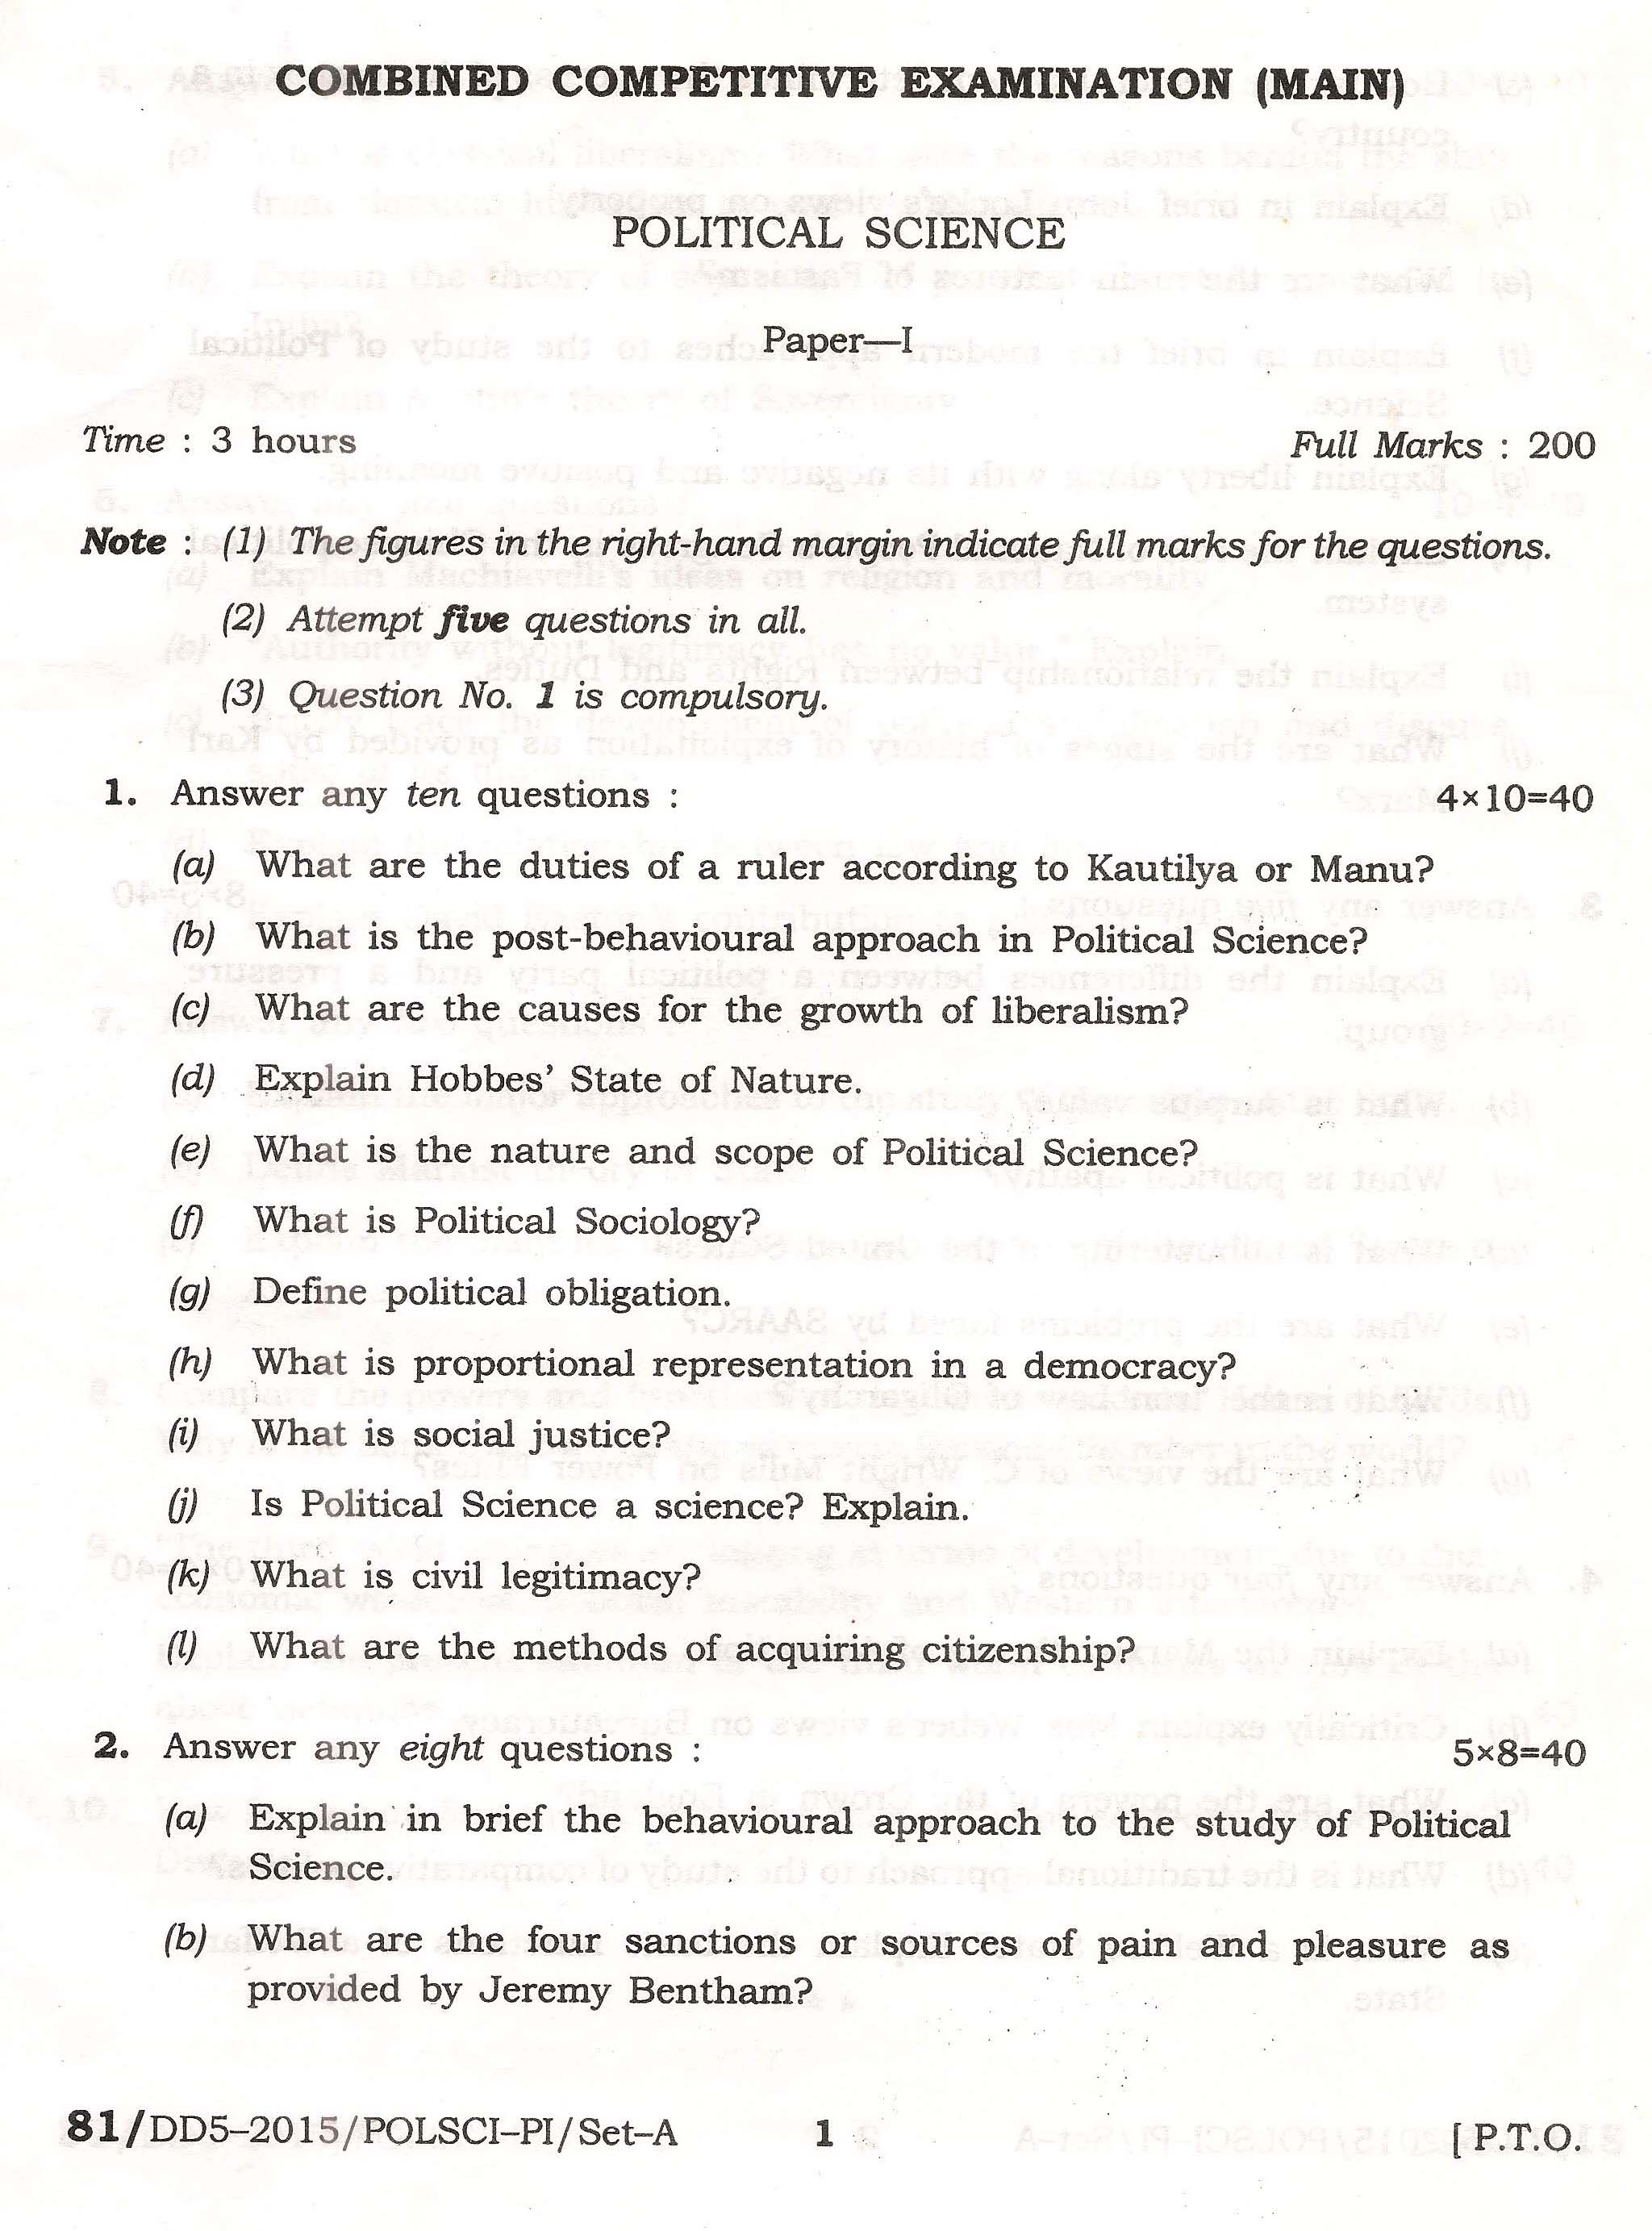 APPSC Combined Competitive Main Exam 2015 Political Science Paper I 1